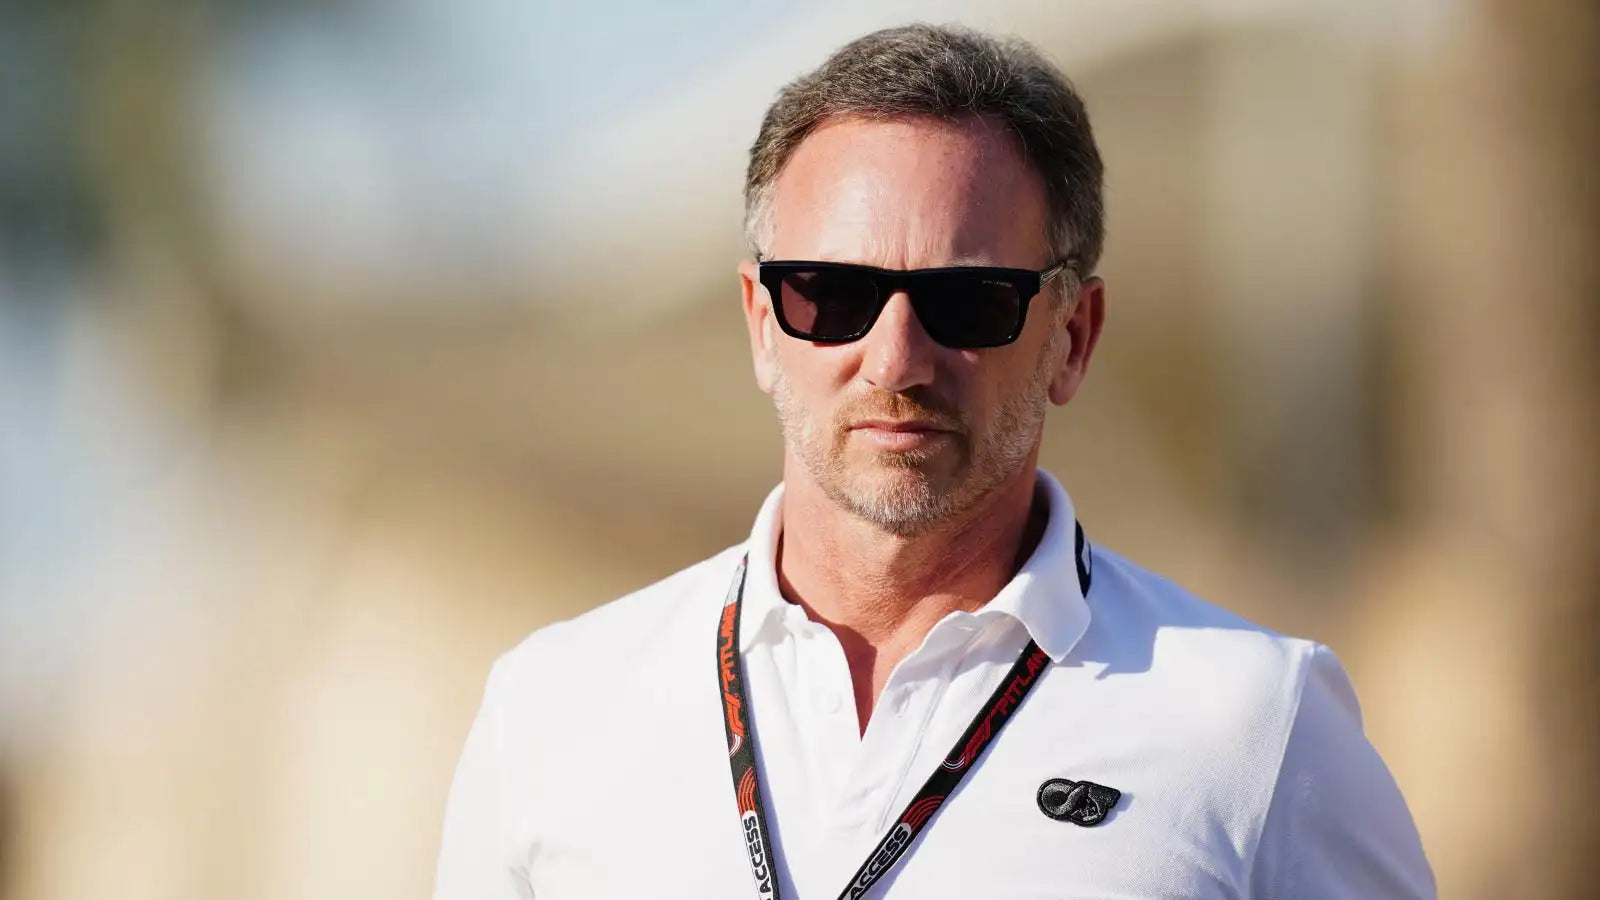 Christian Horner accuser suspended as response to Jos Verstappen issued – F1 news round-up